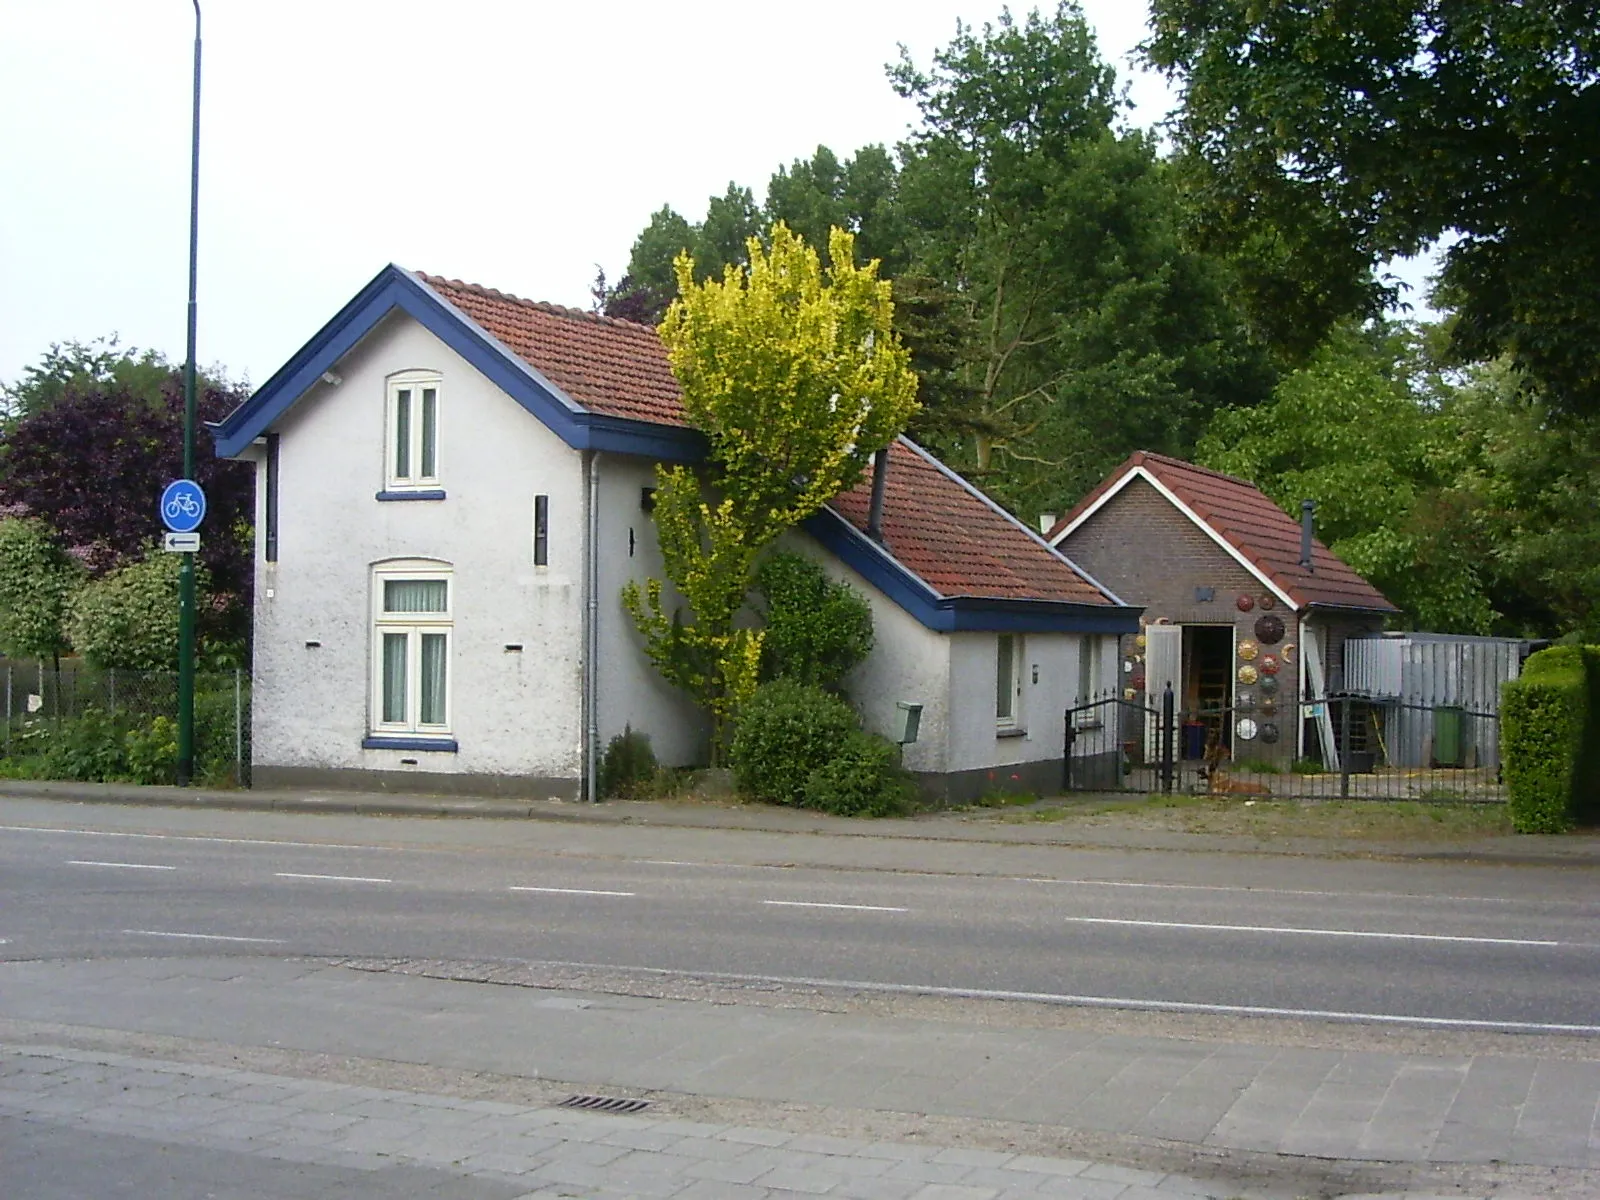 Photo showing: Railroad house, Schoolstraat Mill. This is house 35 on the German line.